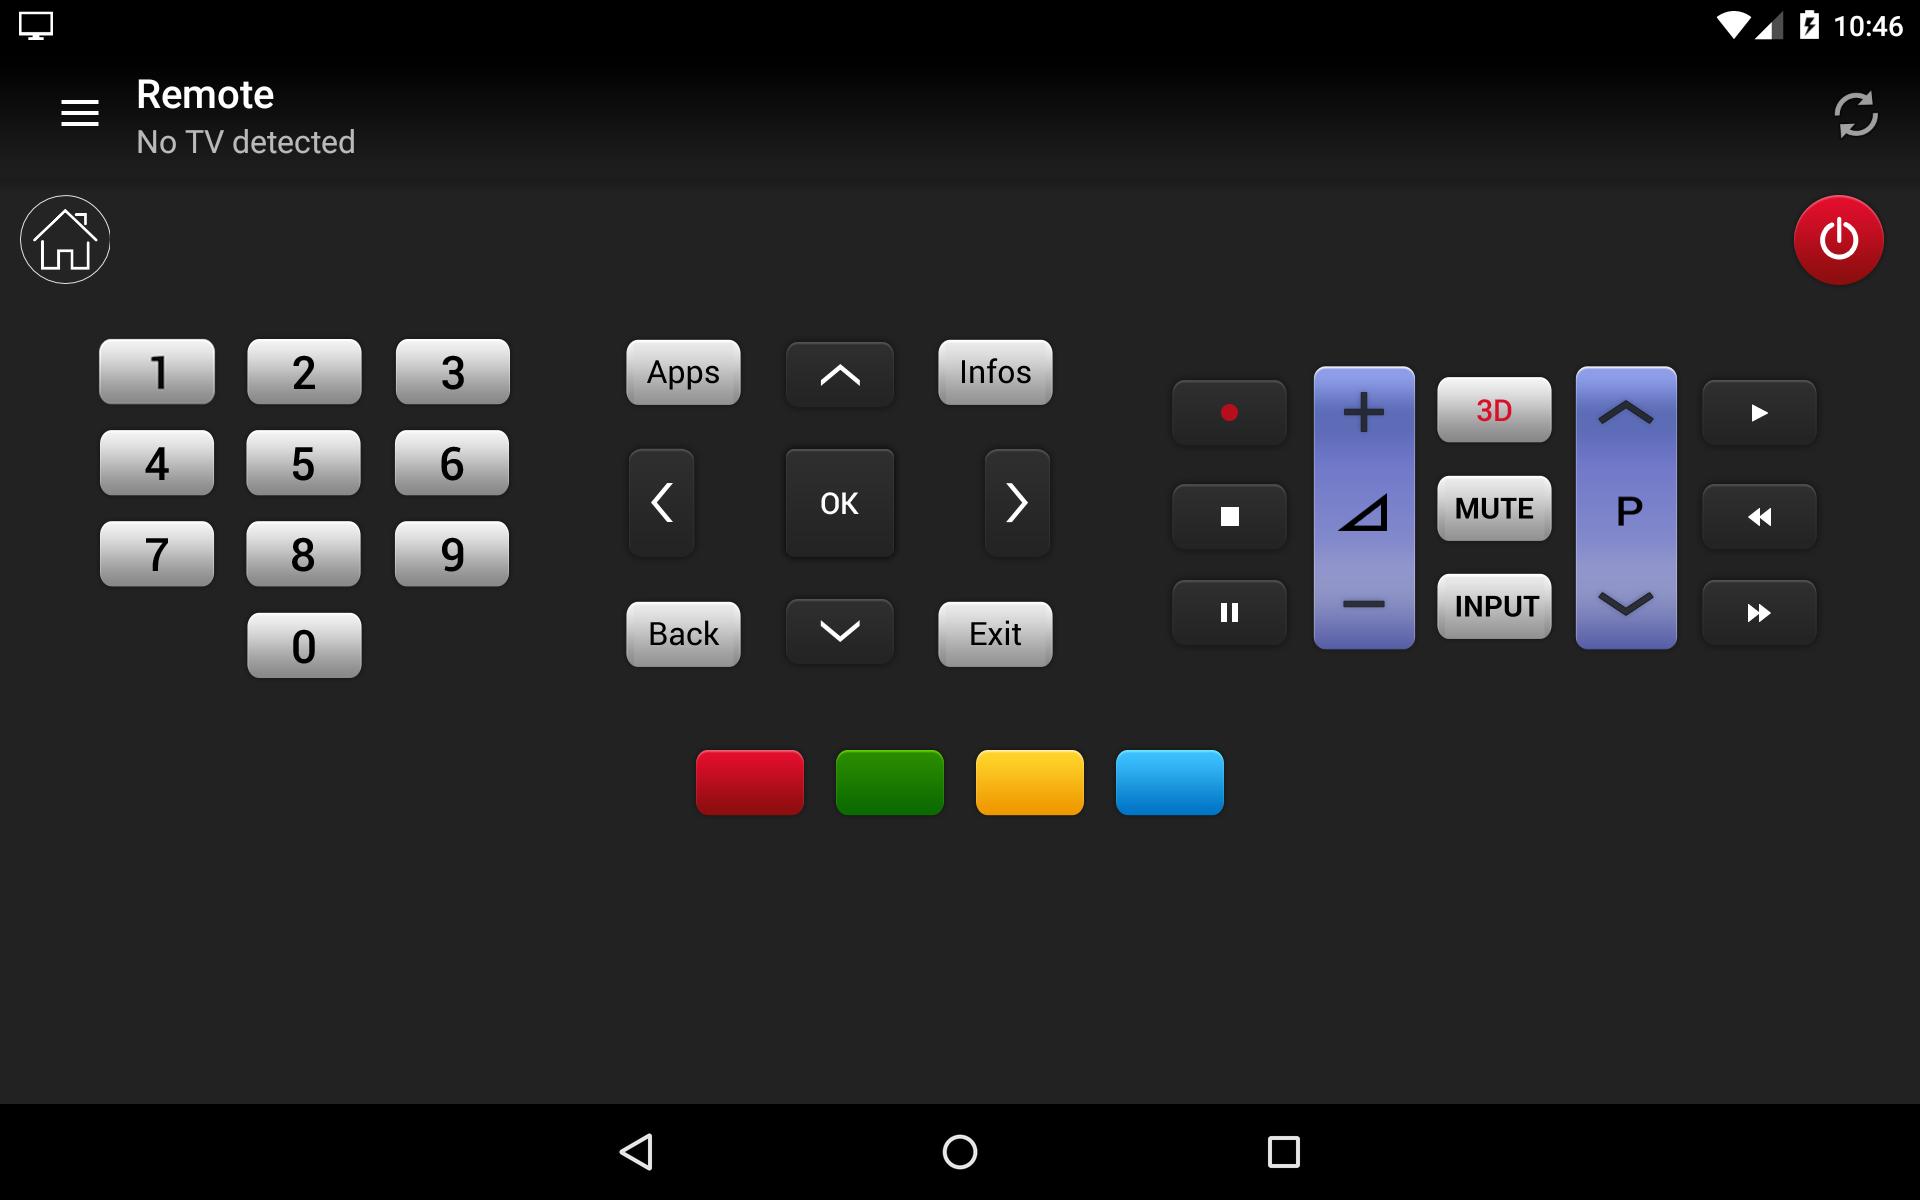 Control Remoto para TV LG for Android - APK Download